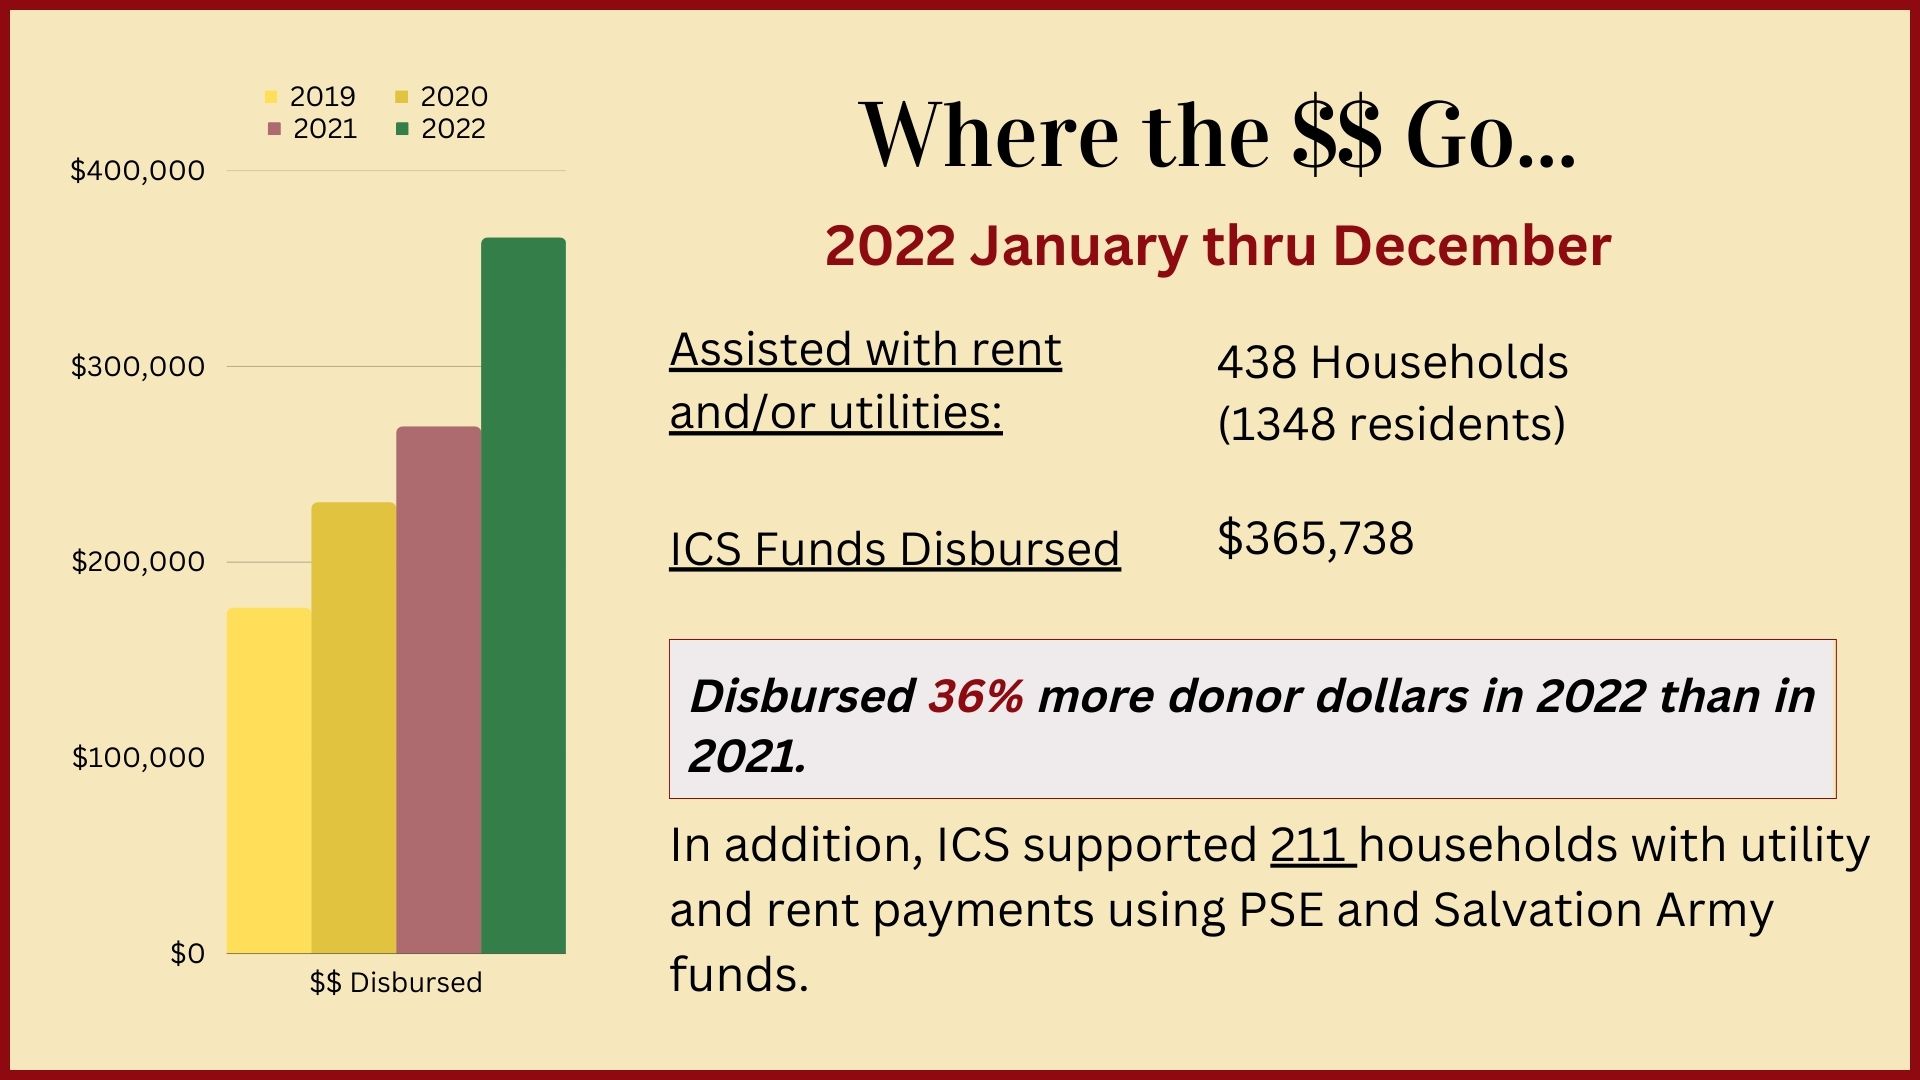 Chart about disbursed funds by ICS 2022